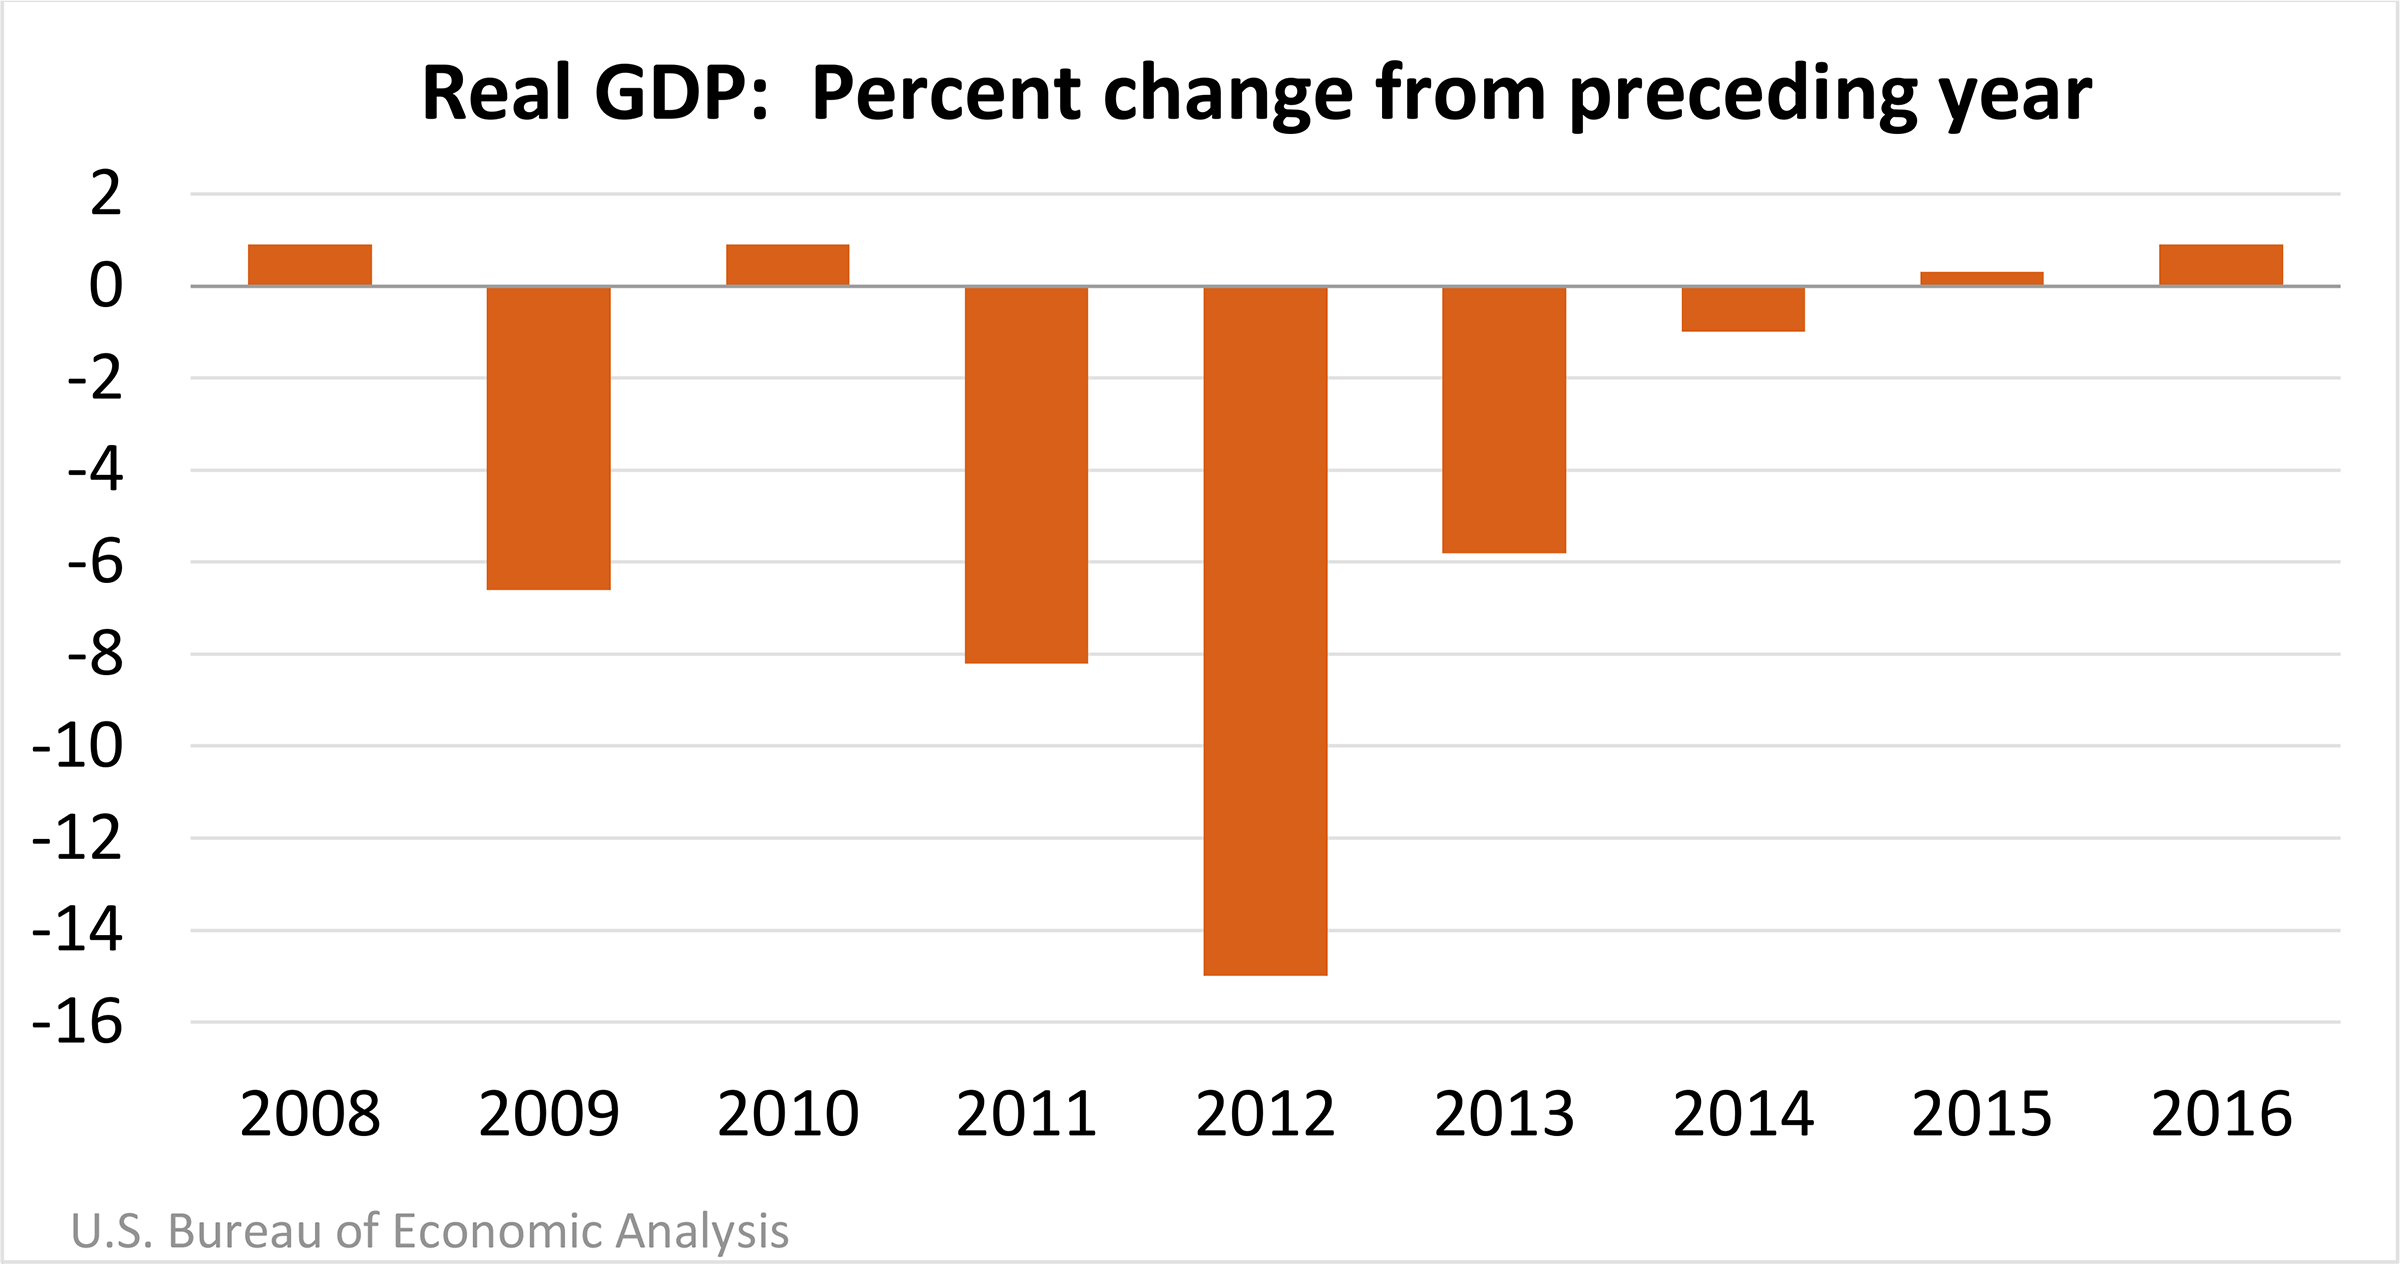 Real GDP: Percent change from the previous year